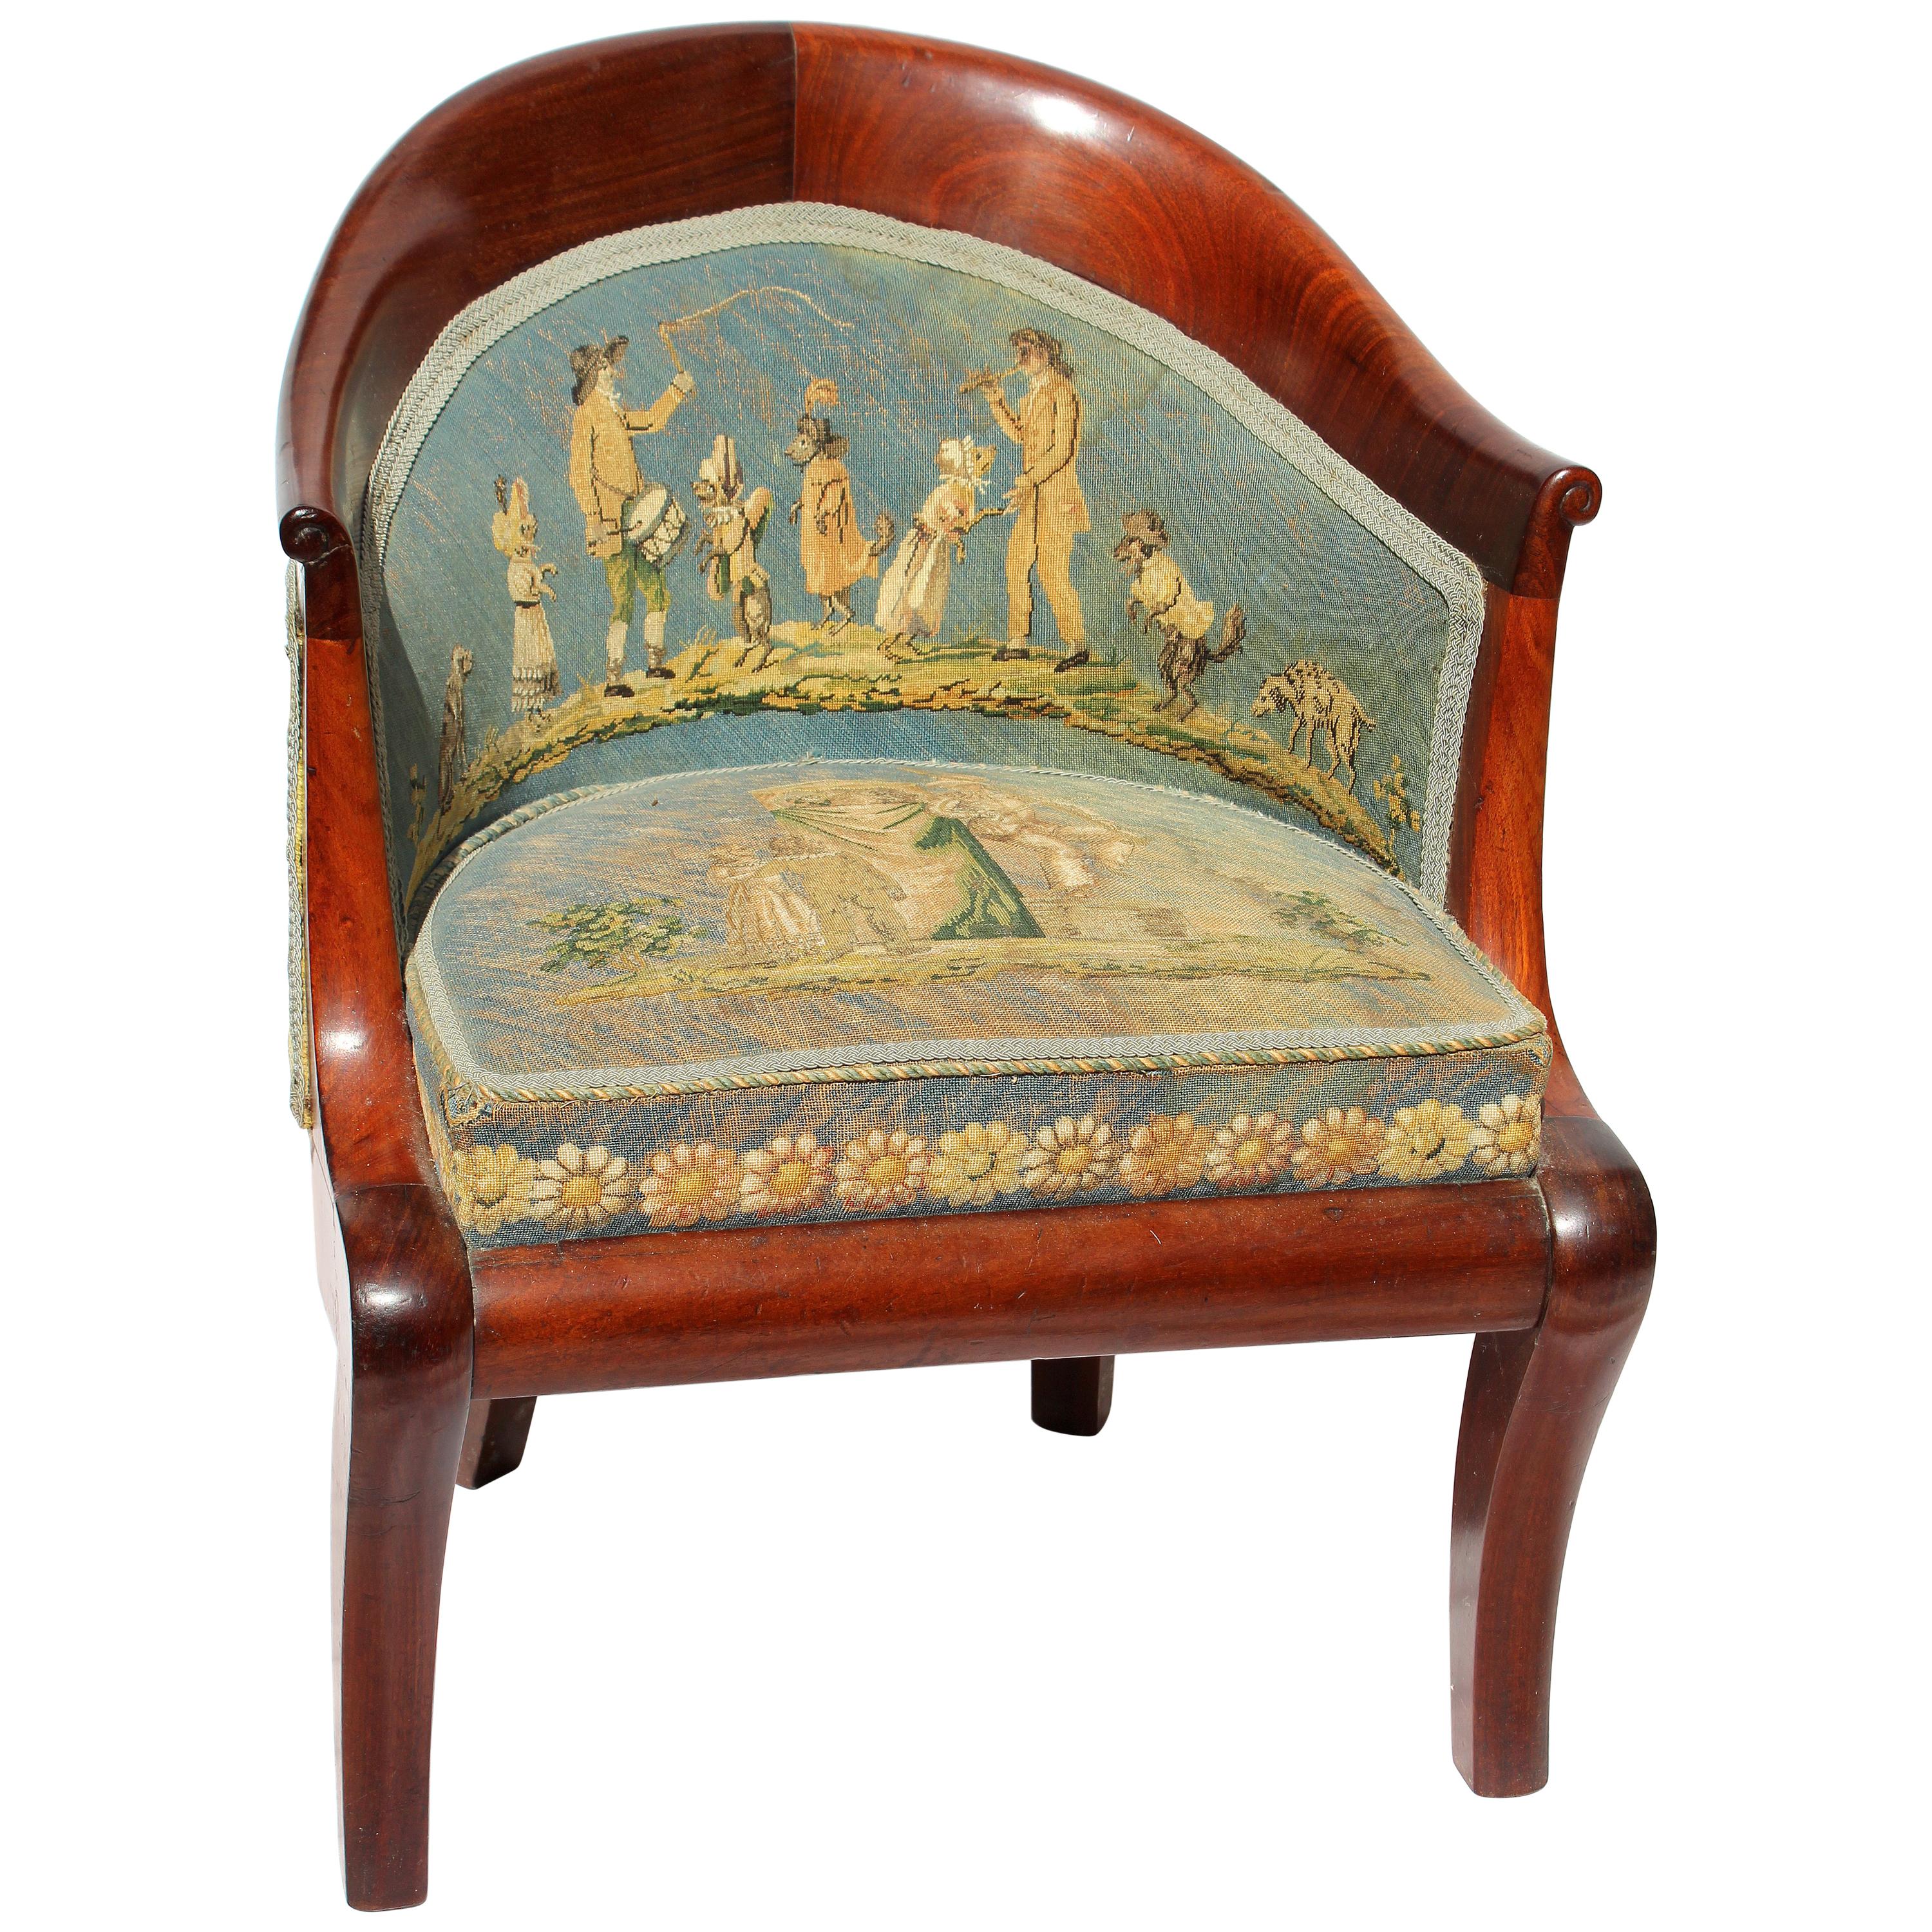 Early 19th Century Directoire Child's Chair with Aubusson Needlepoint Fabric